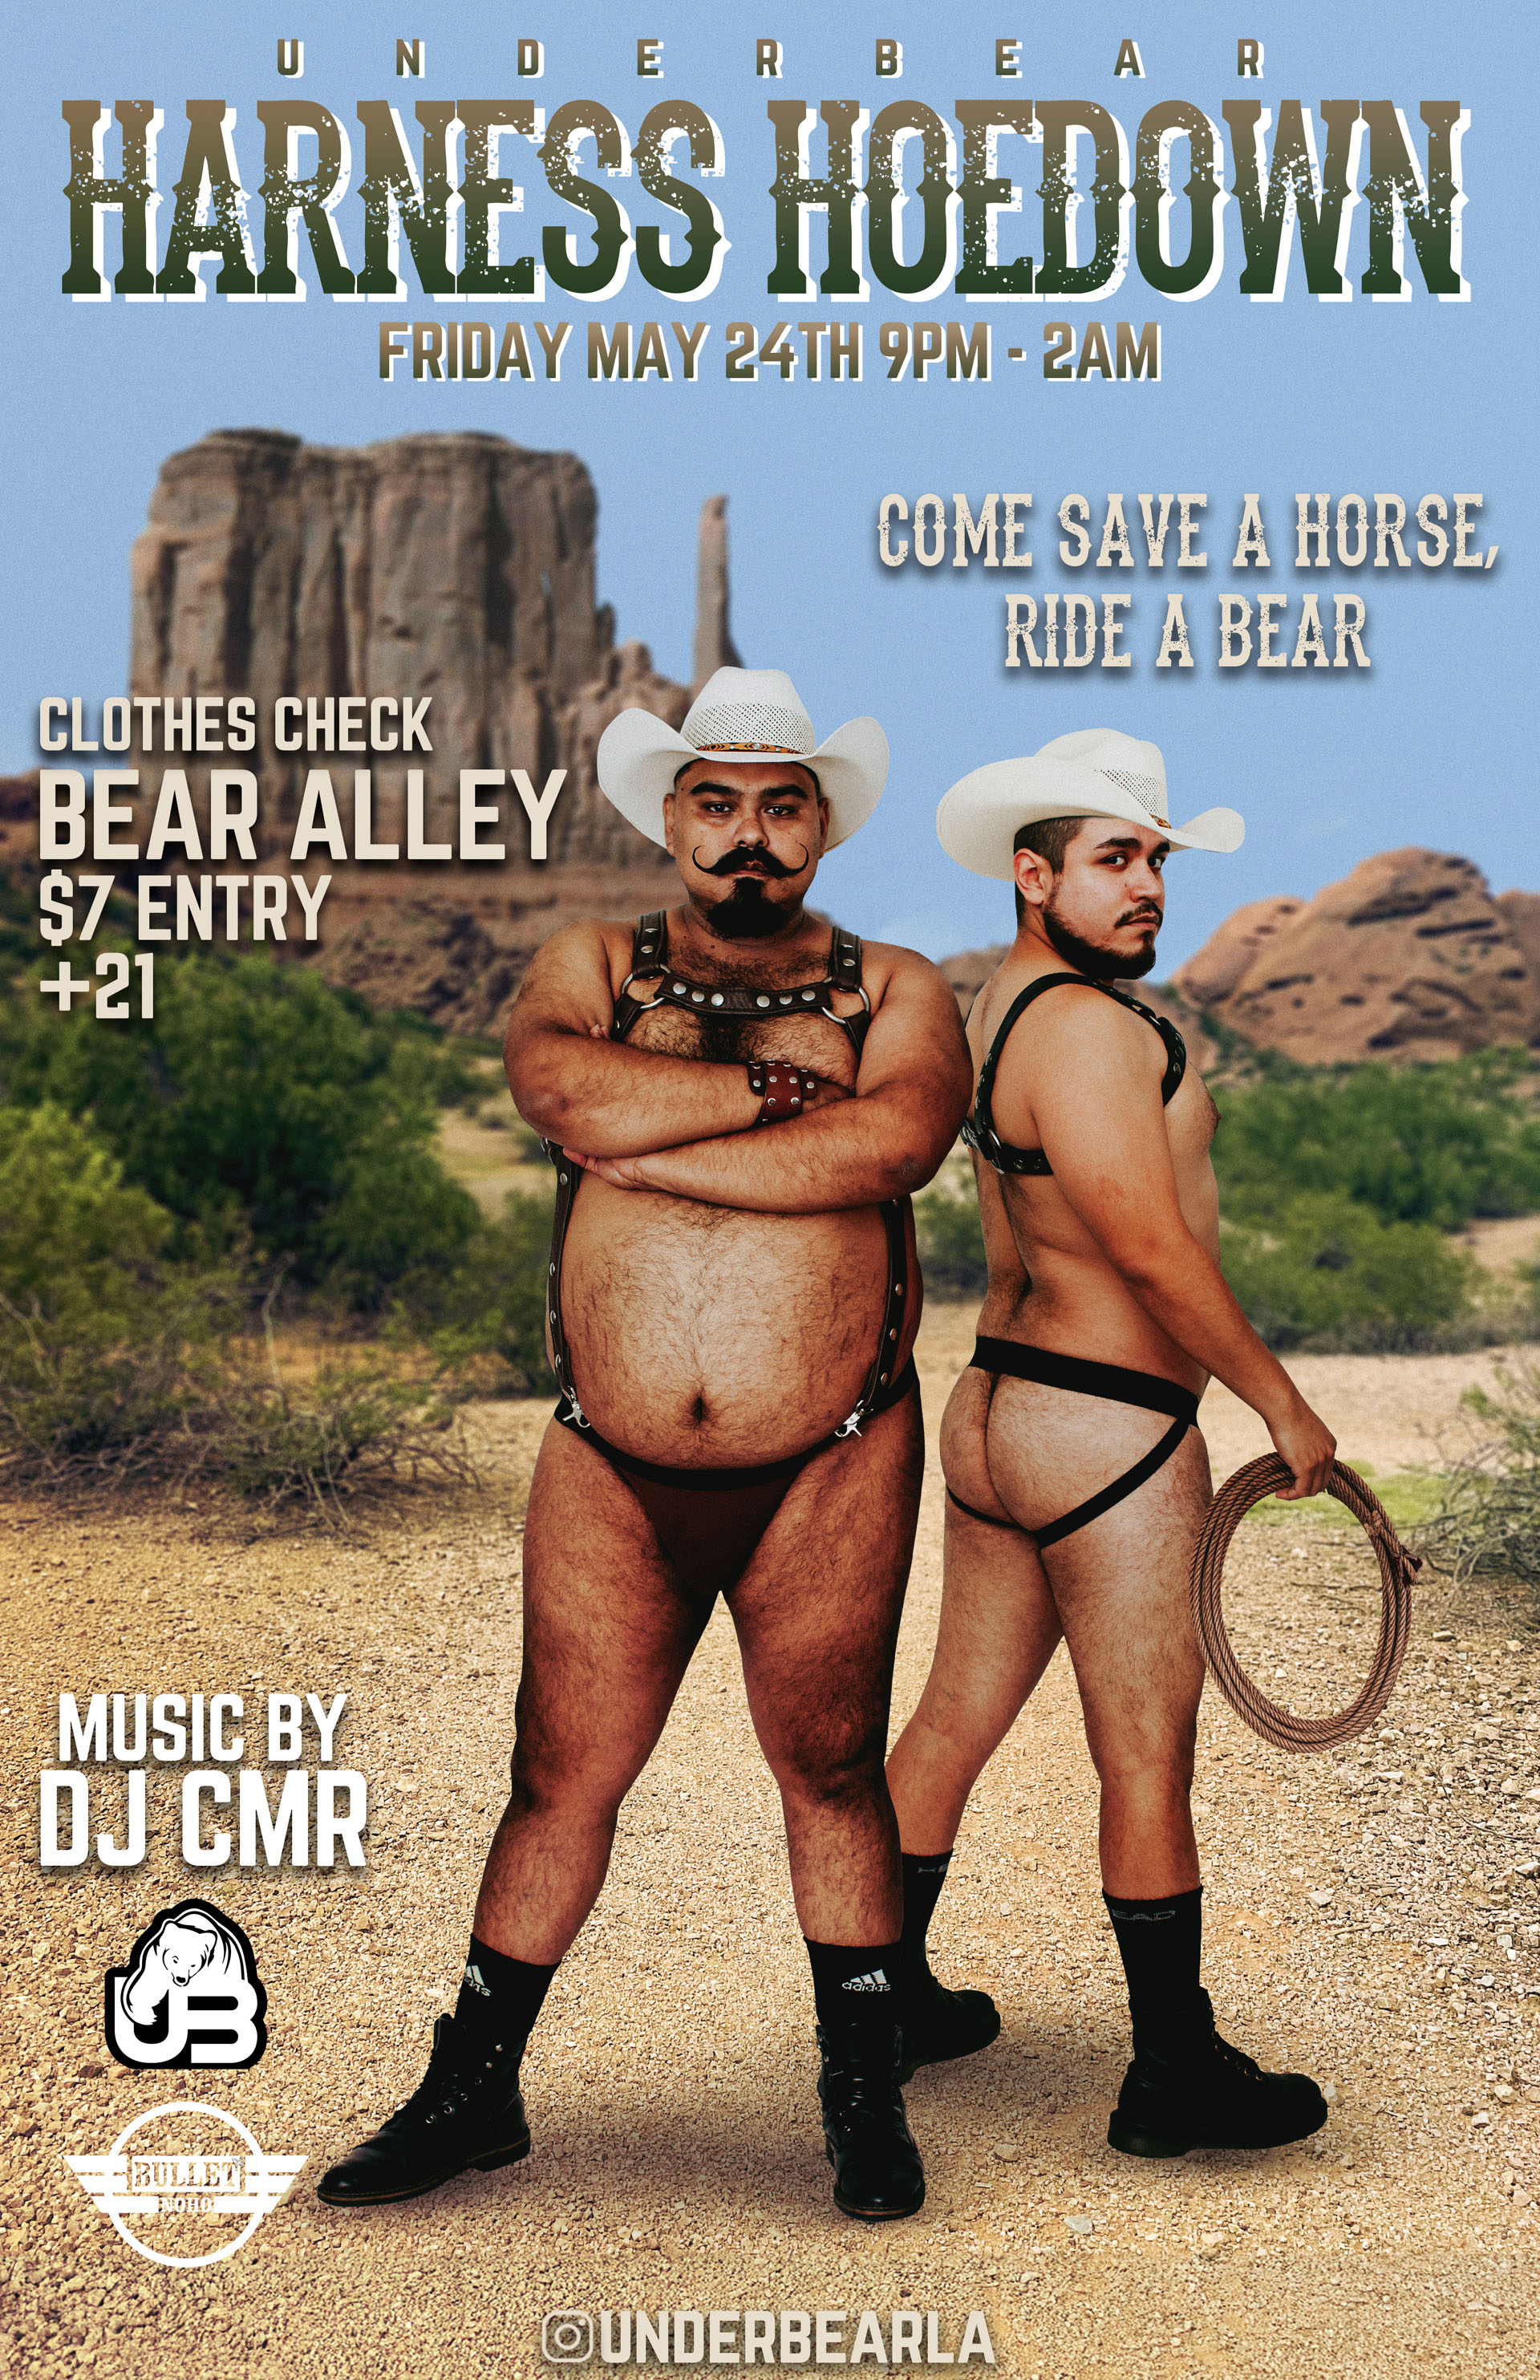 The Bullet Bar and UnderBearParty.com Present UNDERBEAR: HARNESS HOEDOWN with DJ CMR: Friday, 05/26/24 at 9:00 PM! BEAR ALLEY! Free Clothes Check! $7 Cover.